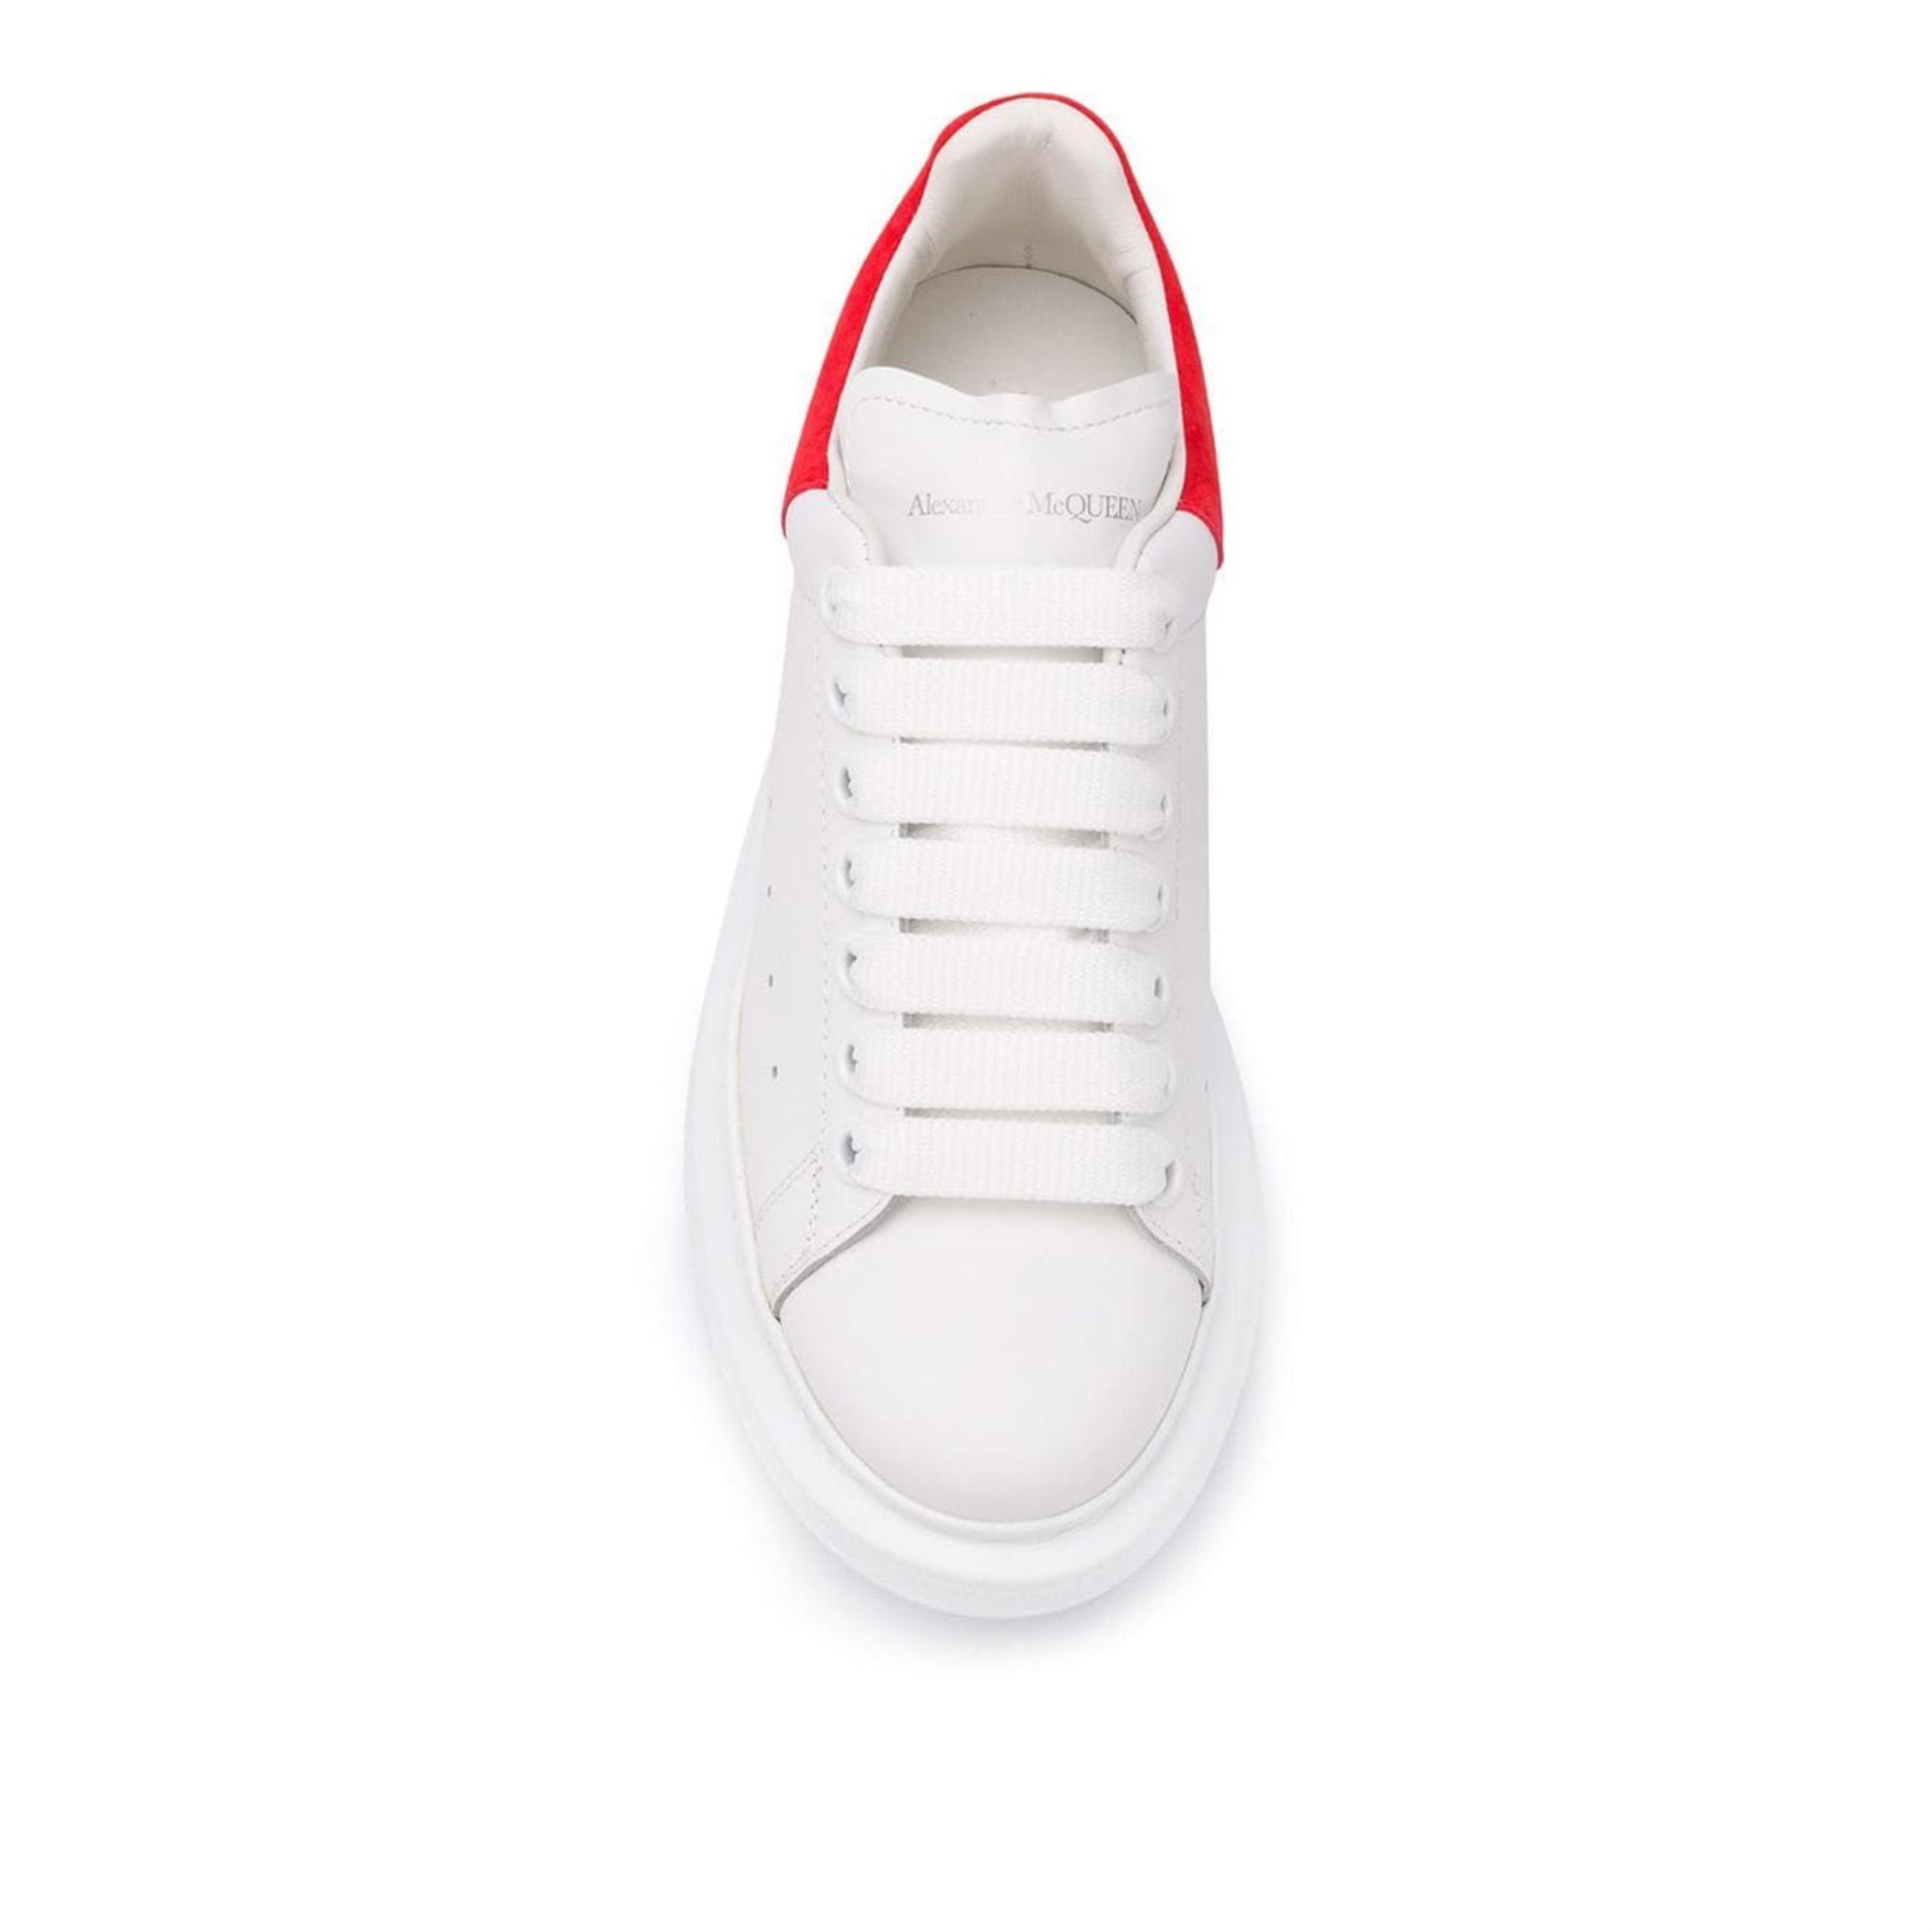 Alexander McQueen - Authenticated Trainer - Leather White Plain for Women, Never Worn